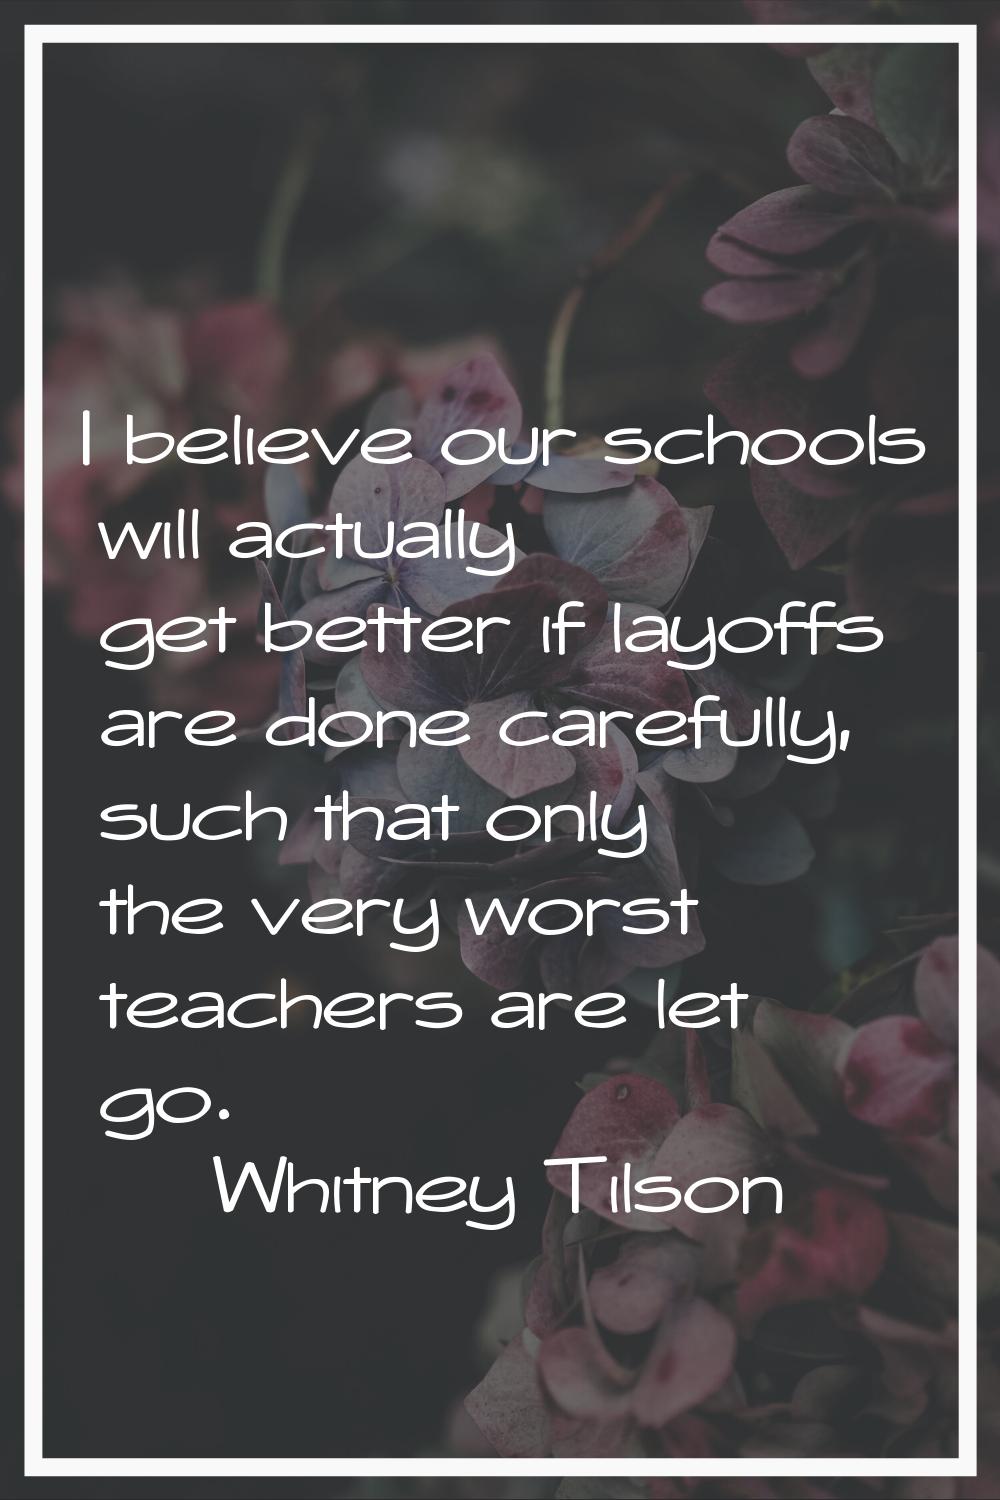 I believe our schools will actually get better if layoffs are done carefully, such that only the ve